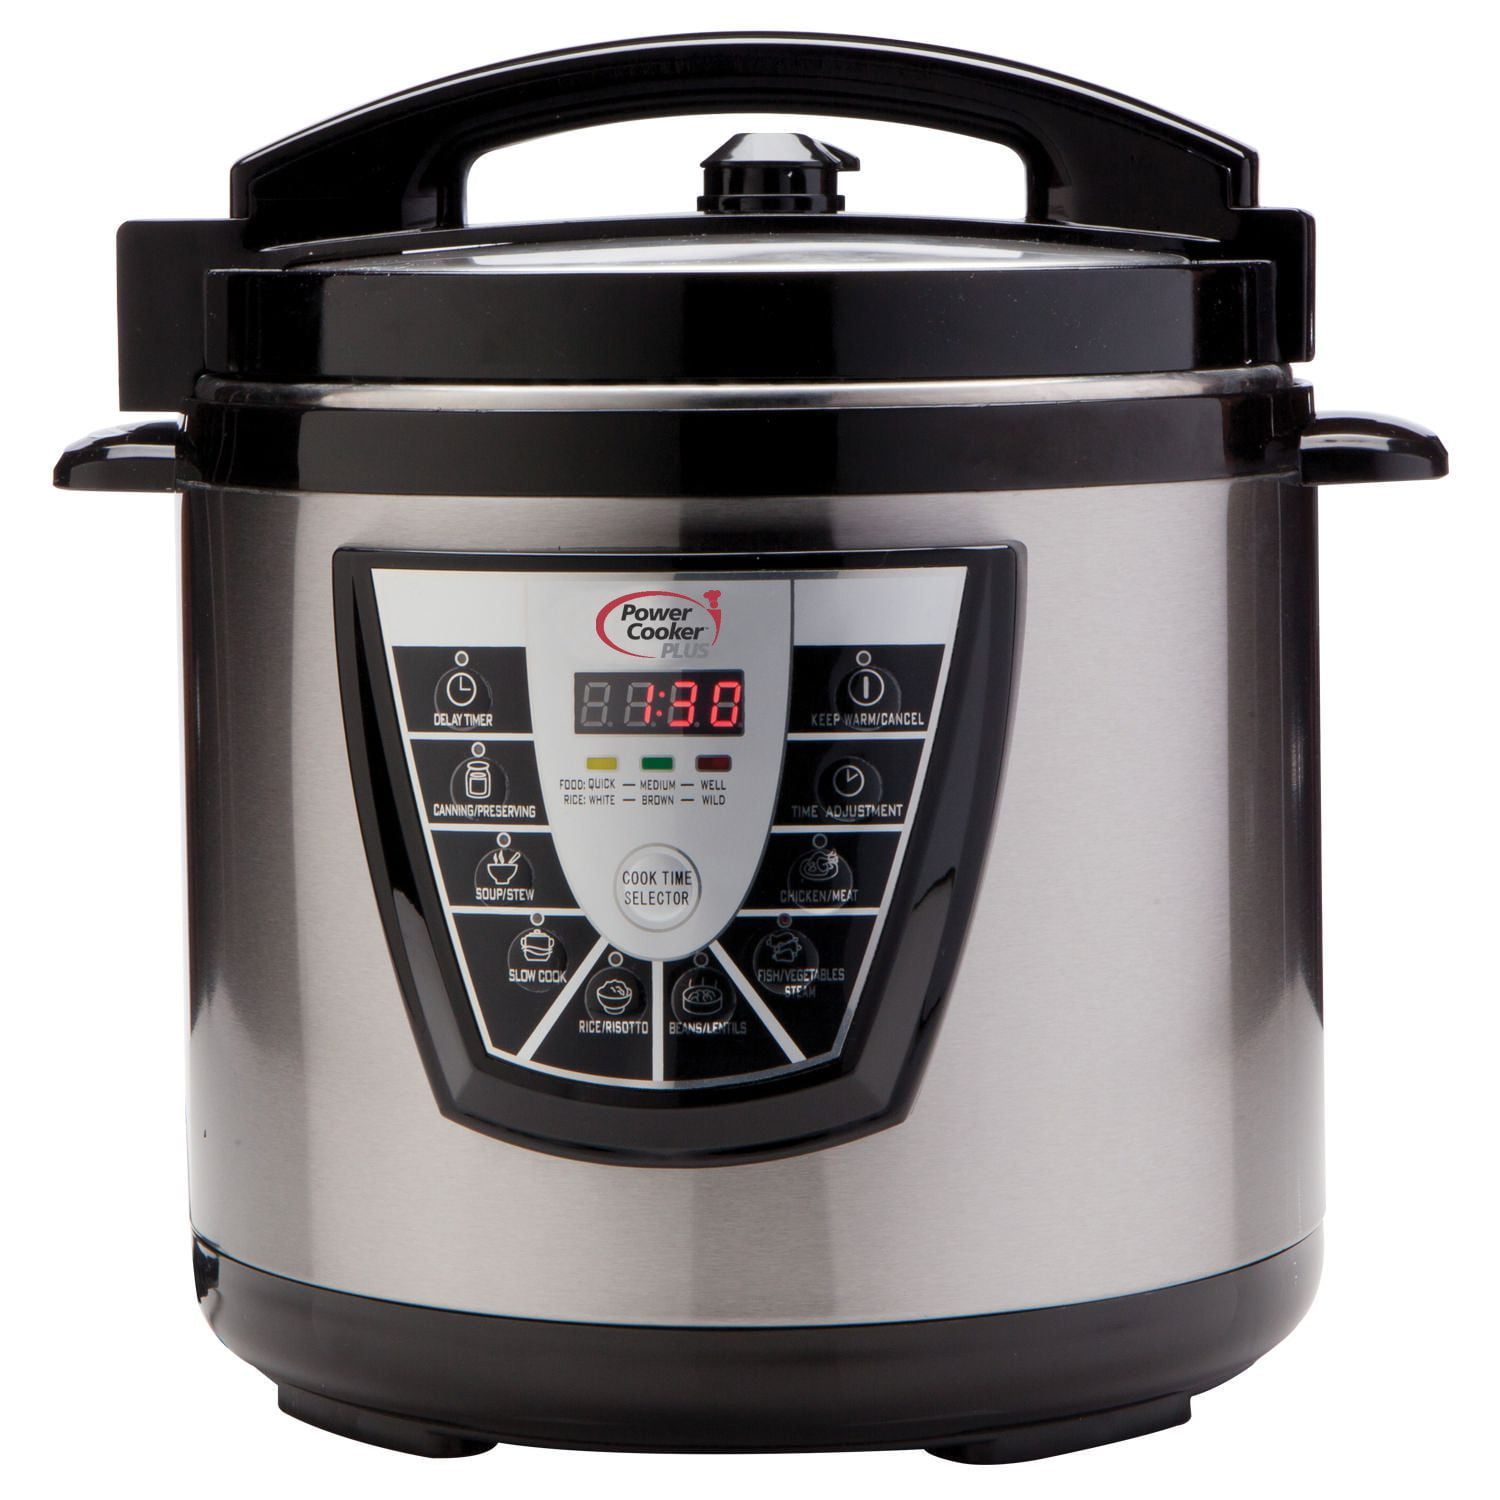 Power Pressure Cooker XL 8-qt Pressure Cooker with Recipes